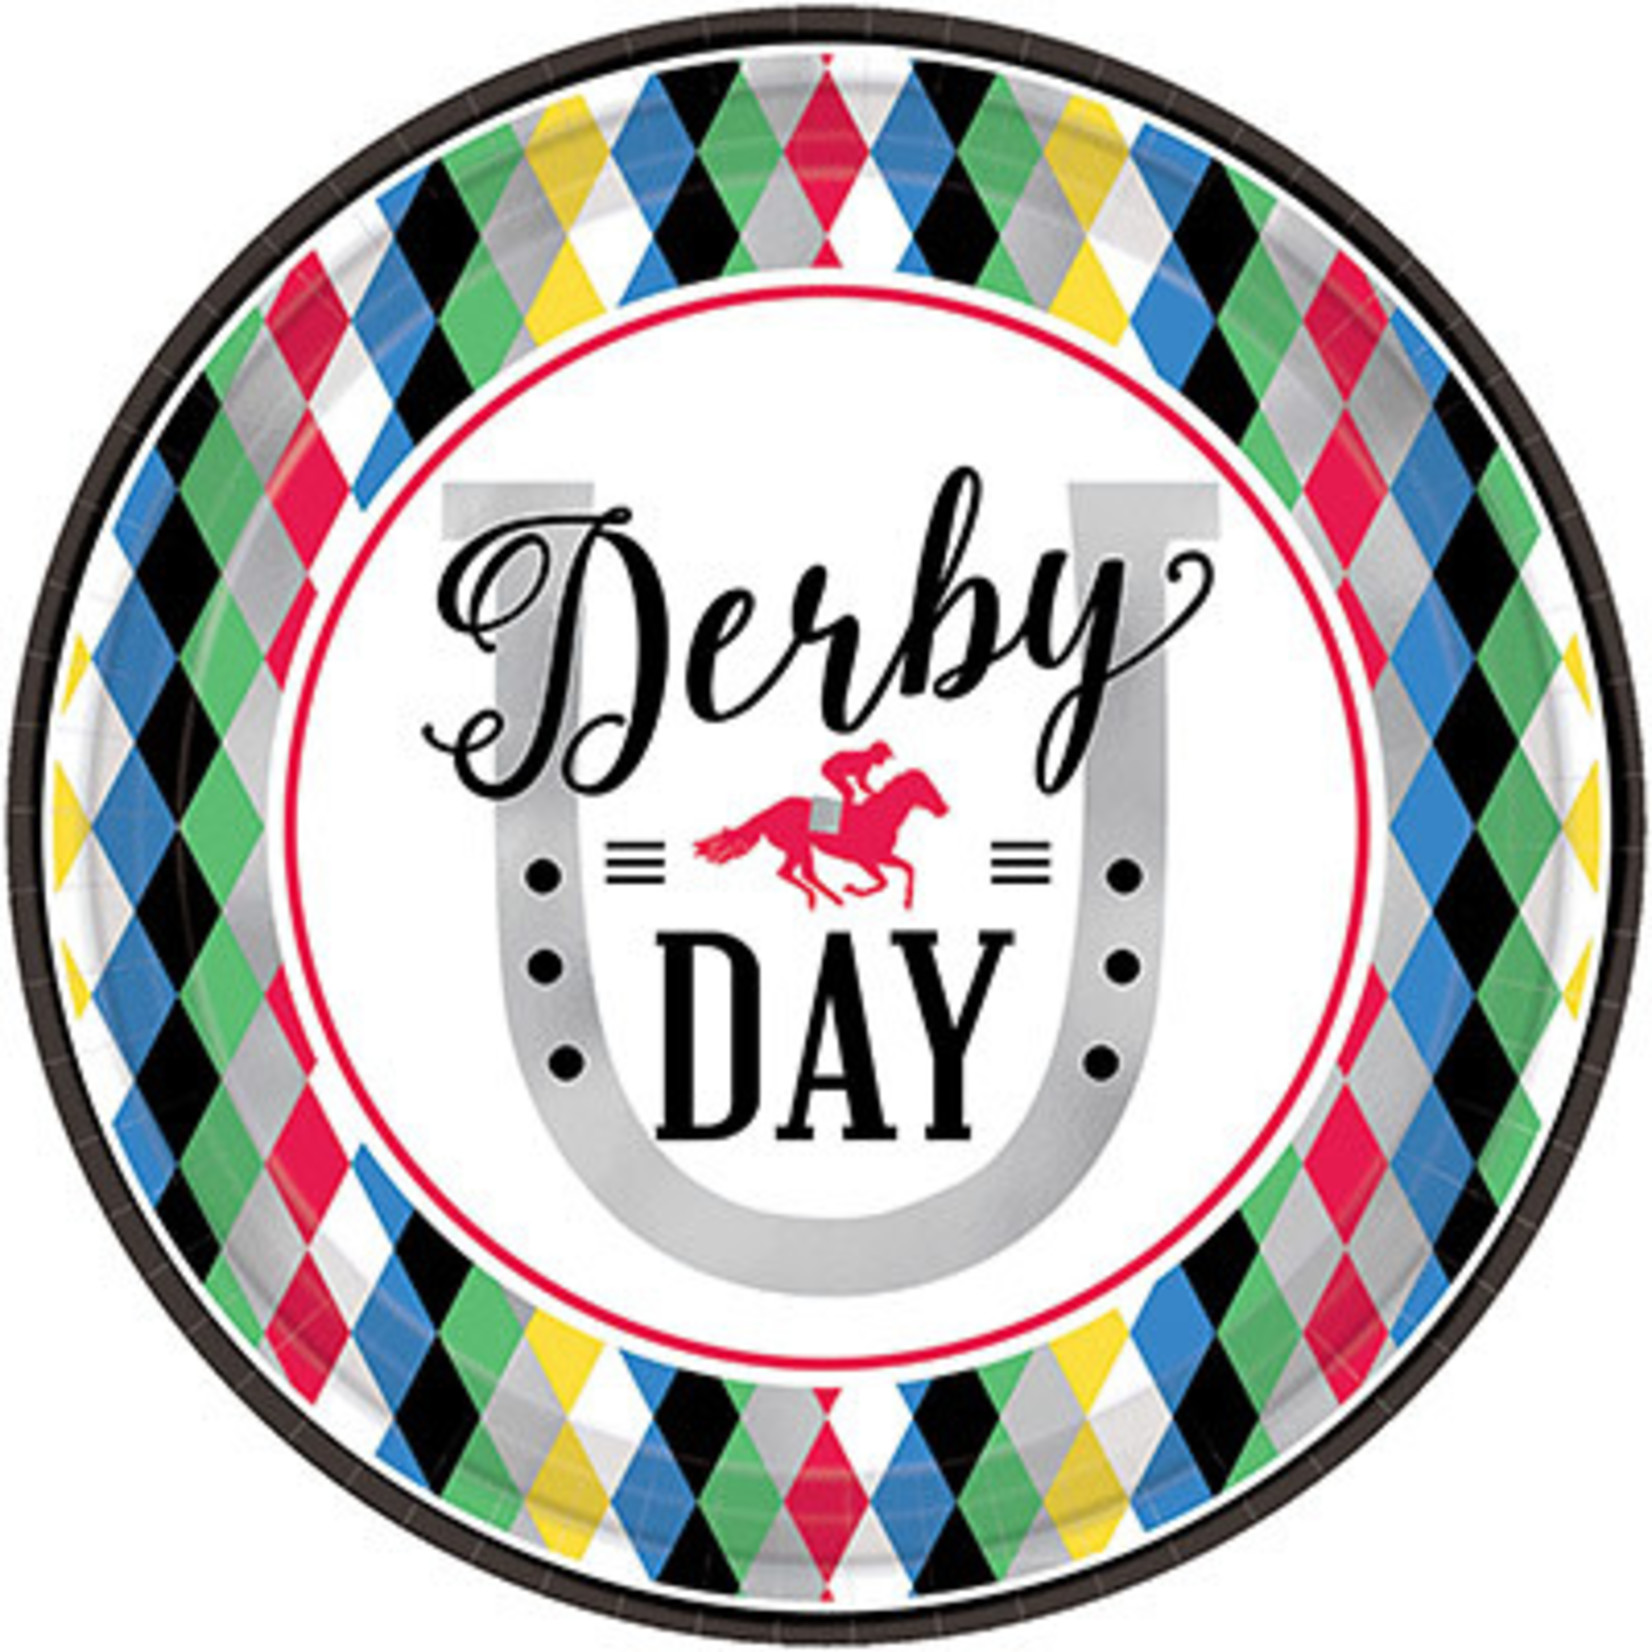 Amscan Derby Day 9" Plates - 8ct.